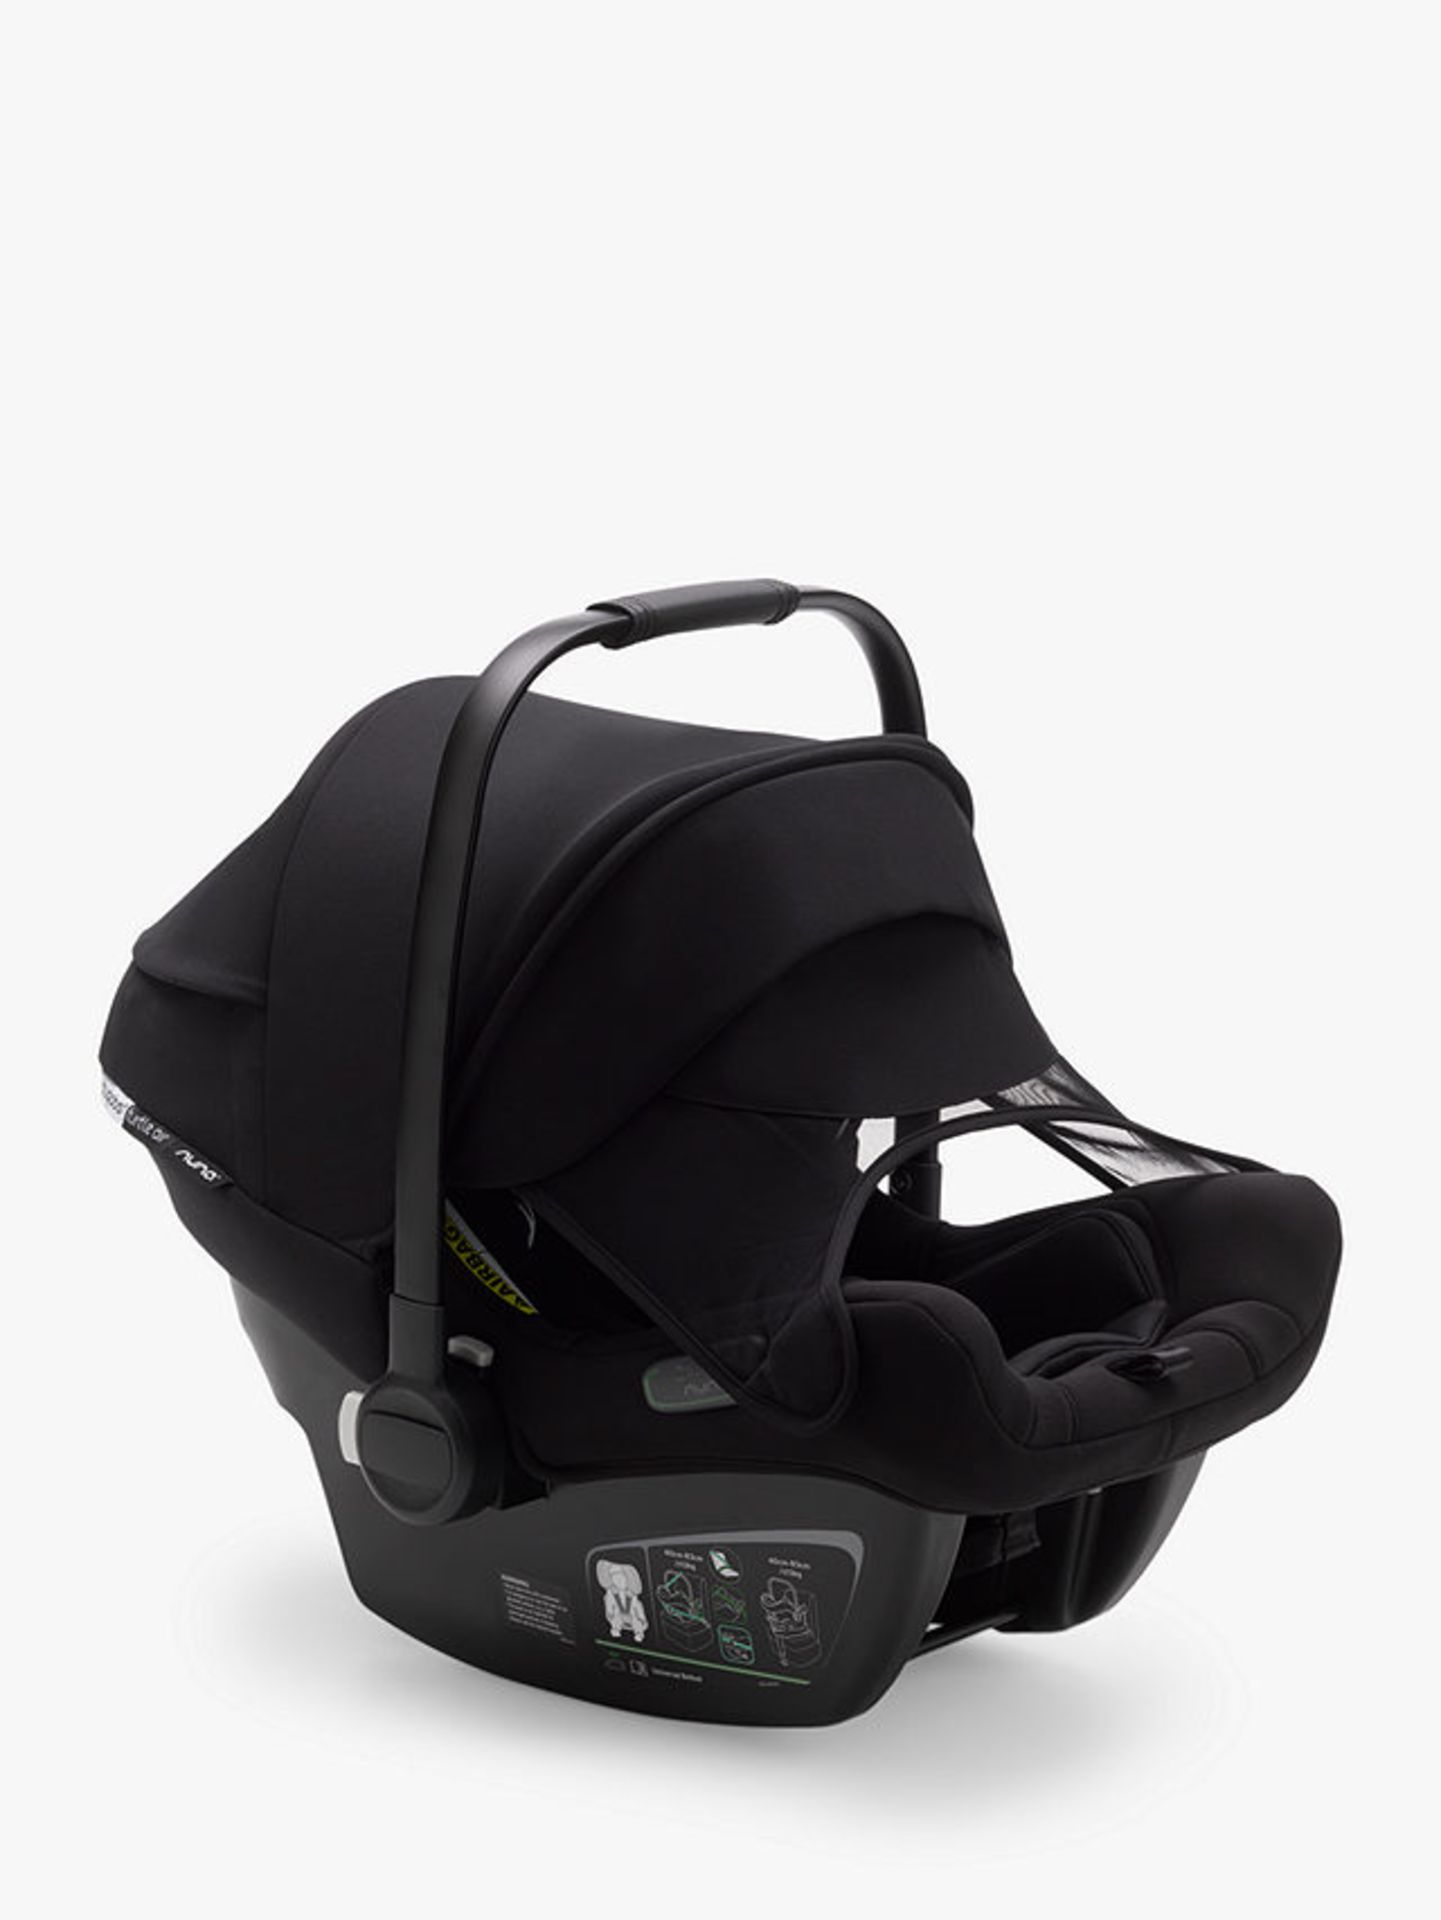 BUGABOO TURTLE AIR BY NUNA CAR SEAT IN BLACK - RRP £209 - Image 2 of 7